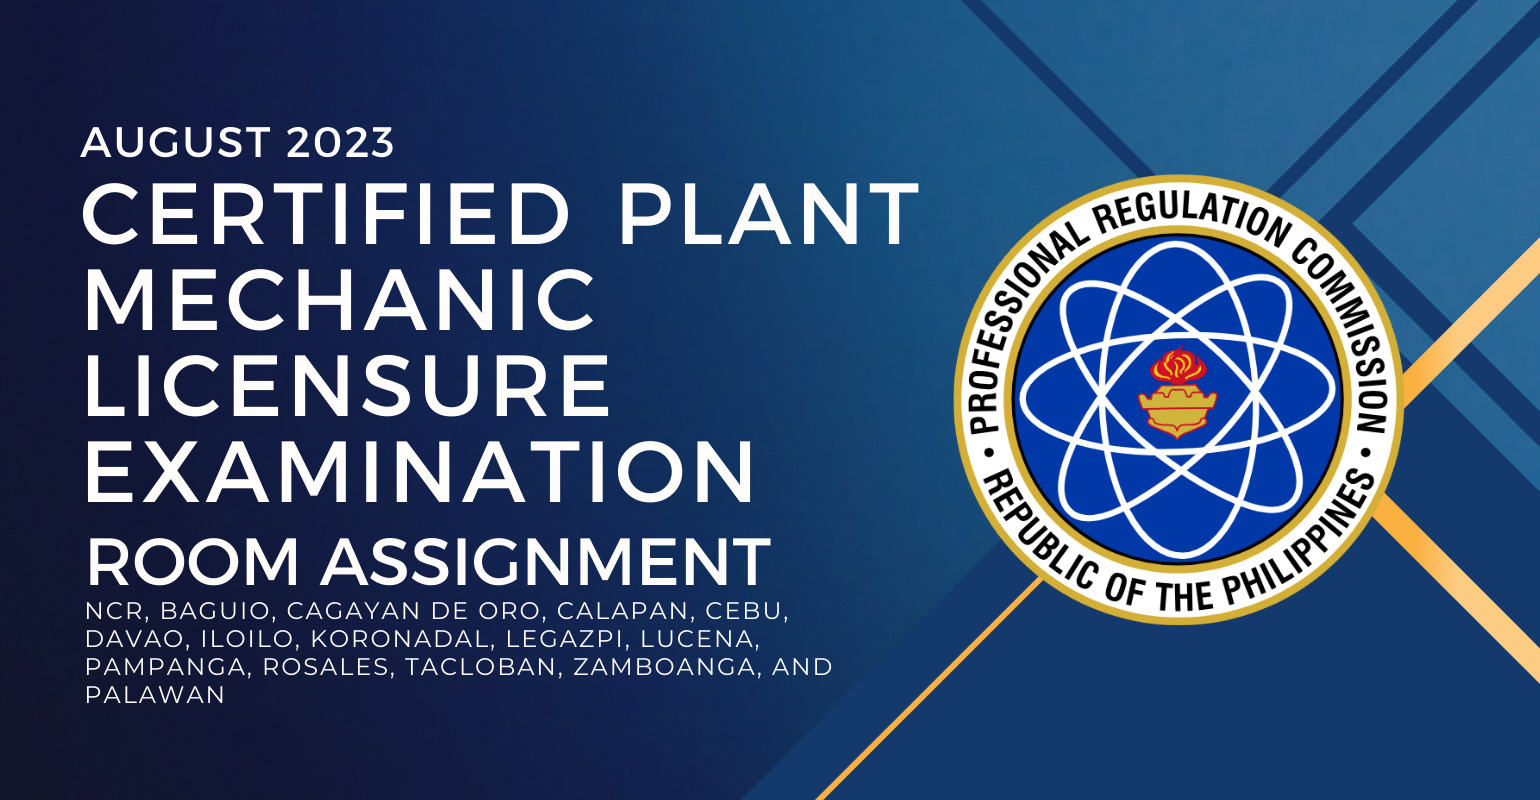 room assignment august 2023 certified plant mechanic licensure exam1